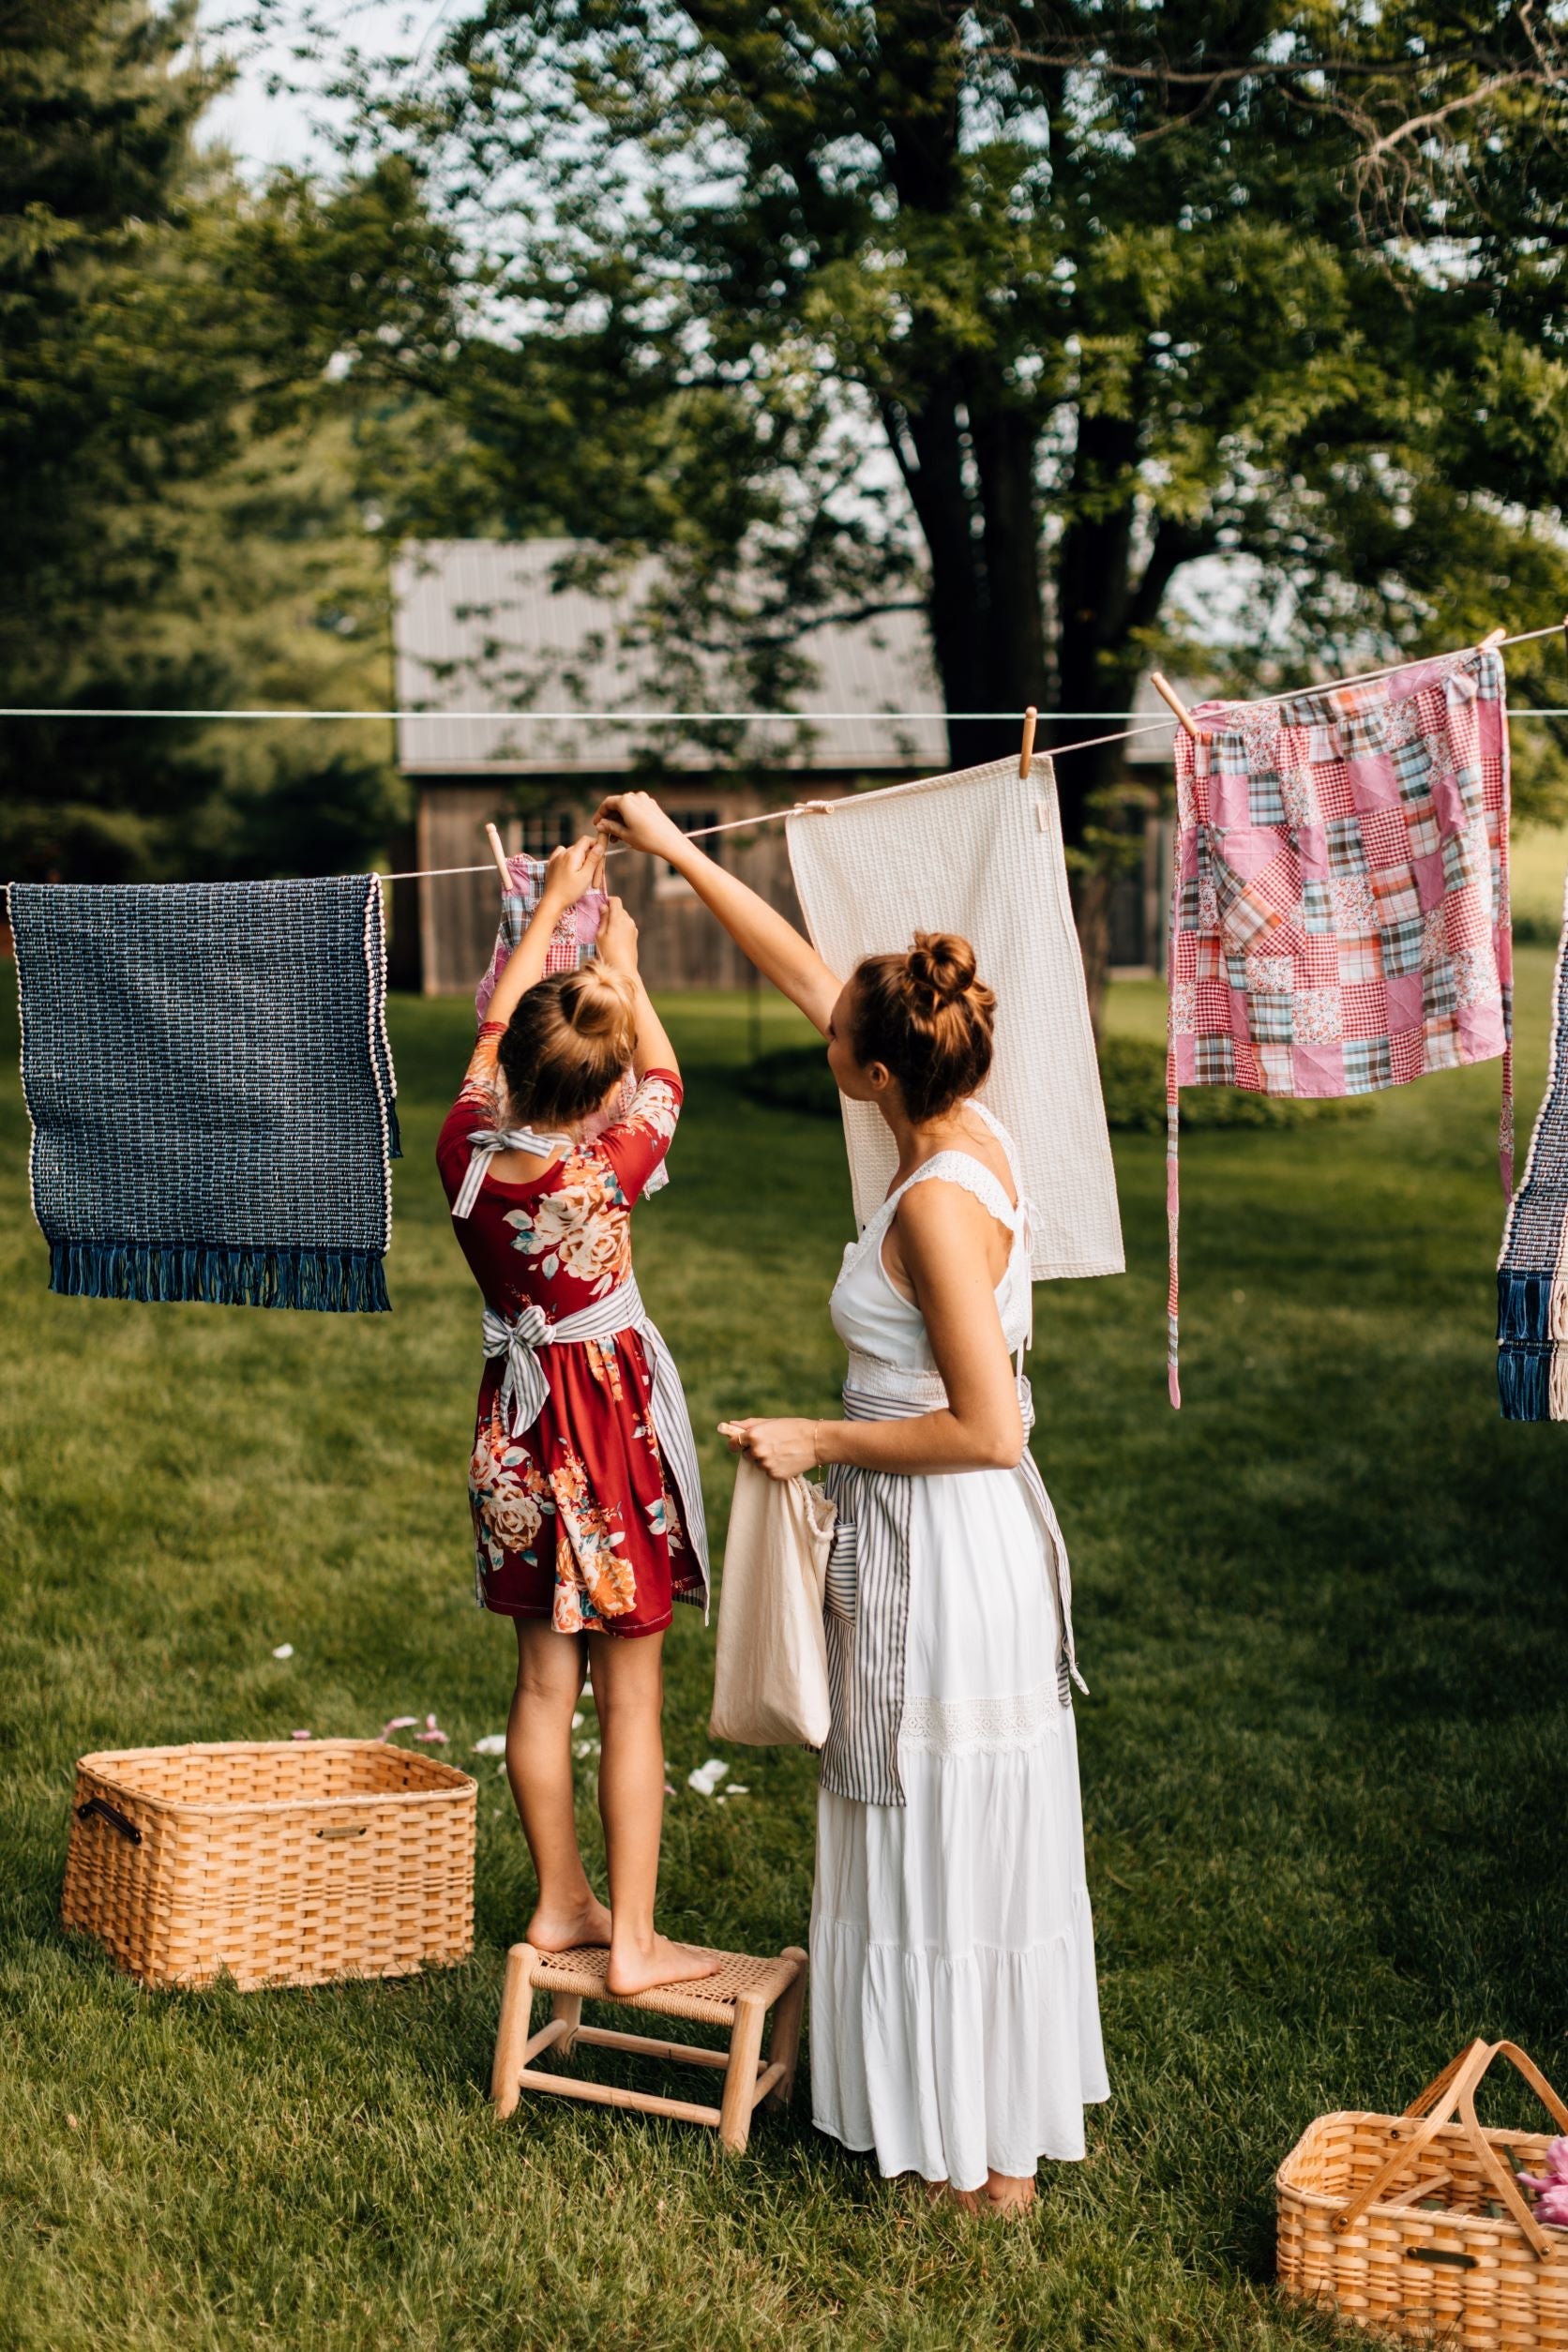 The Adult Quilted Patchwork Apron Hanging on a Clothesline